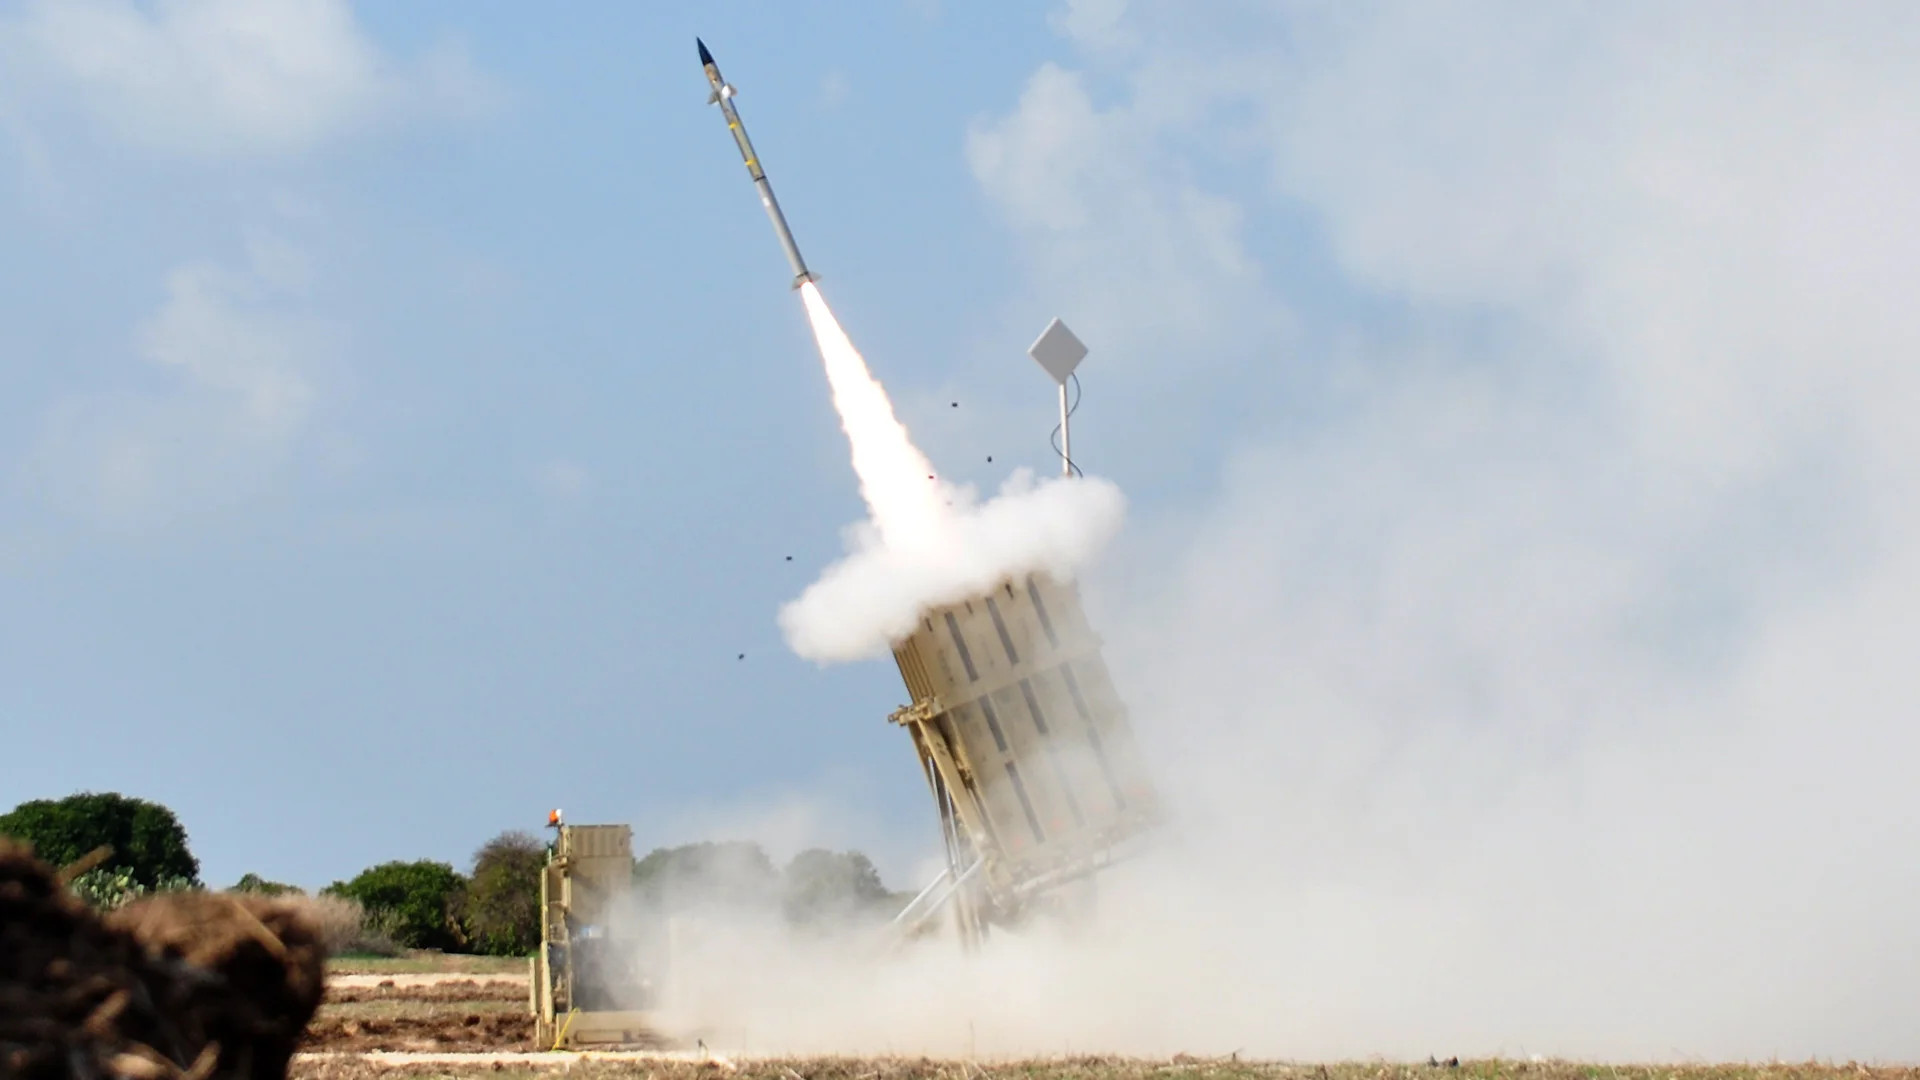 An Israeli Iron Dome defense system in action. The IDF has publicly acknowledged Iron Dome systems accidentally shooting down friendly drones in the past. <em>IDF</em>